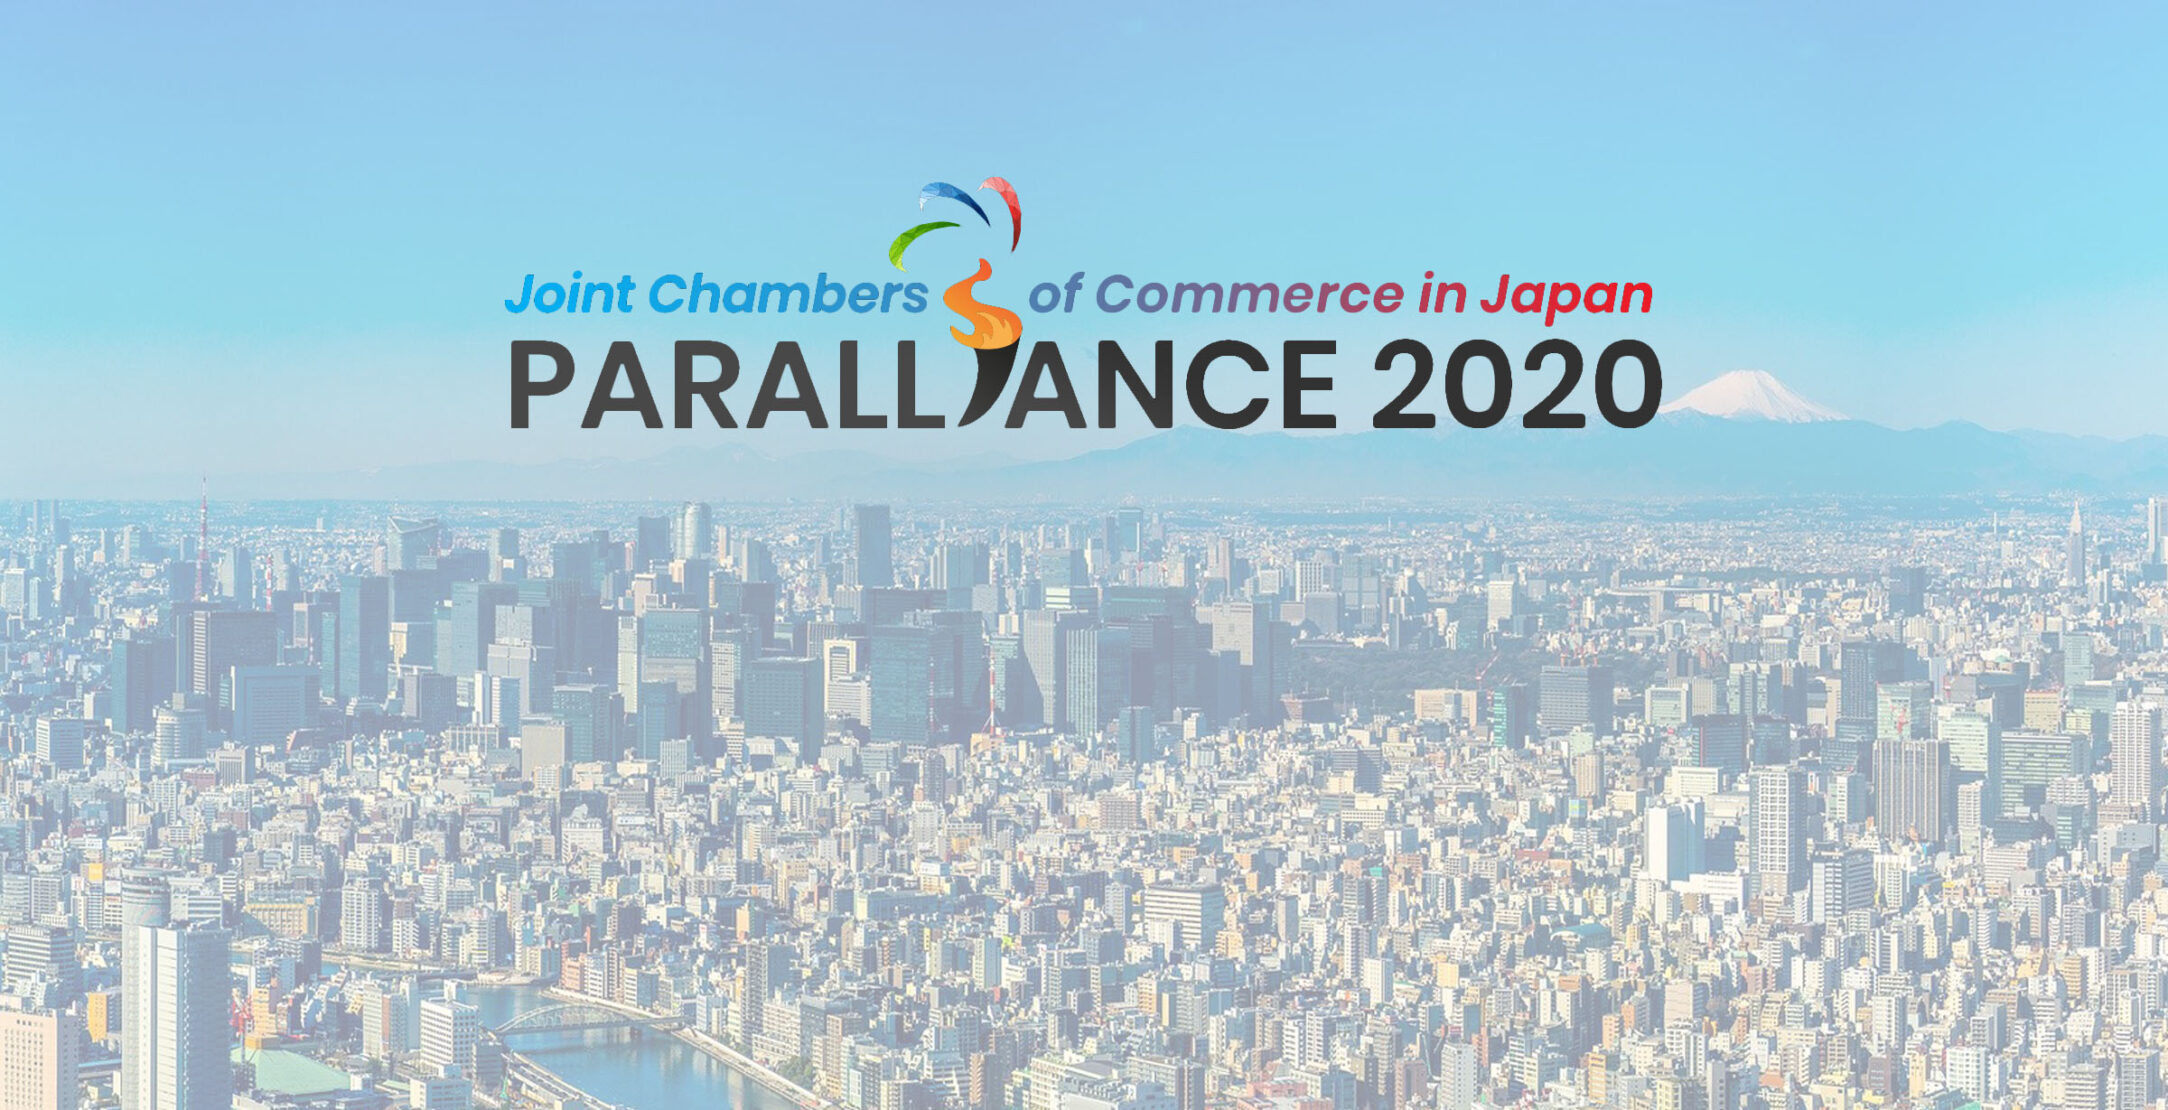 Paralliance: Tokyo 2020 Paralympics 1 Year to Go! – A Discussion with the International Paralympic Committee